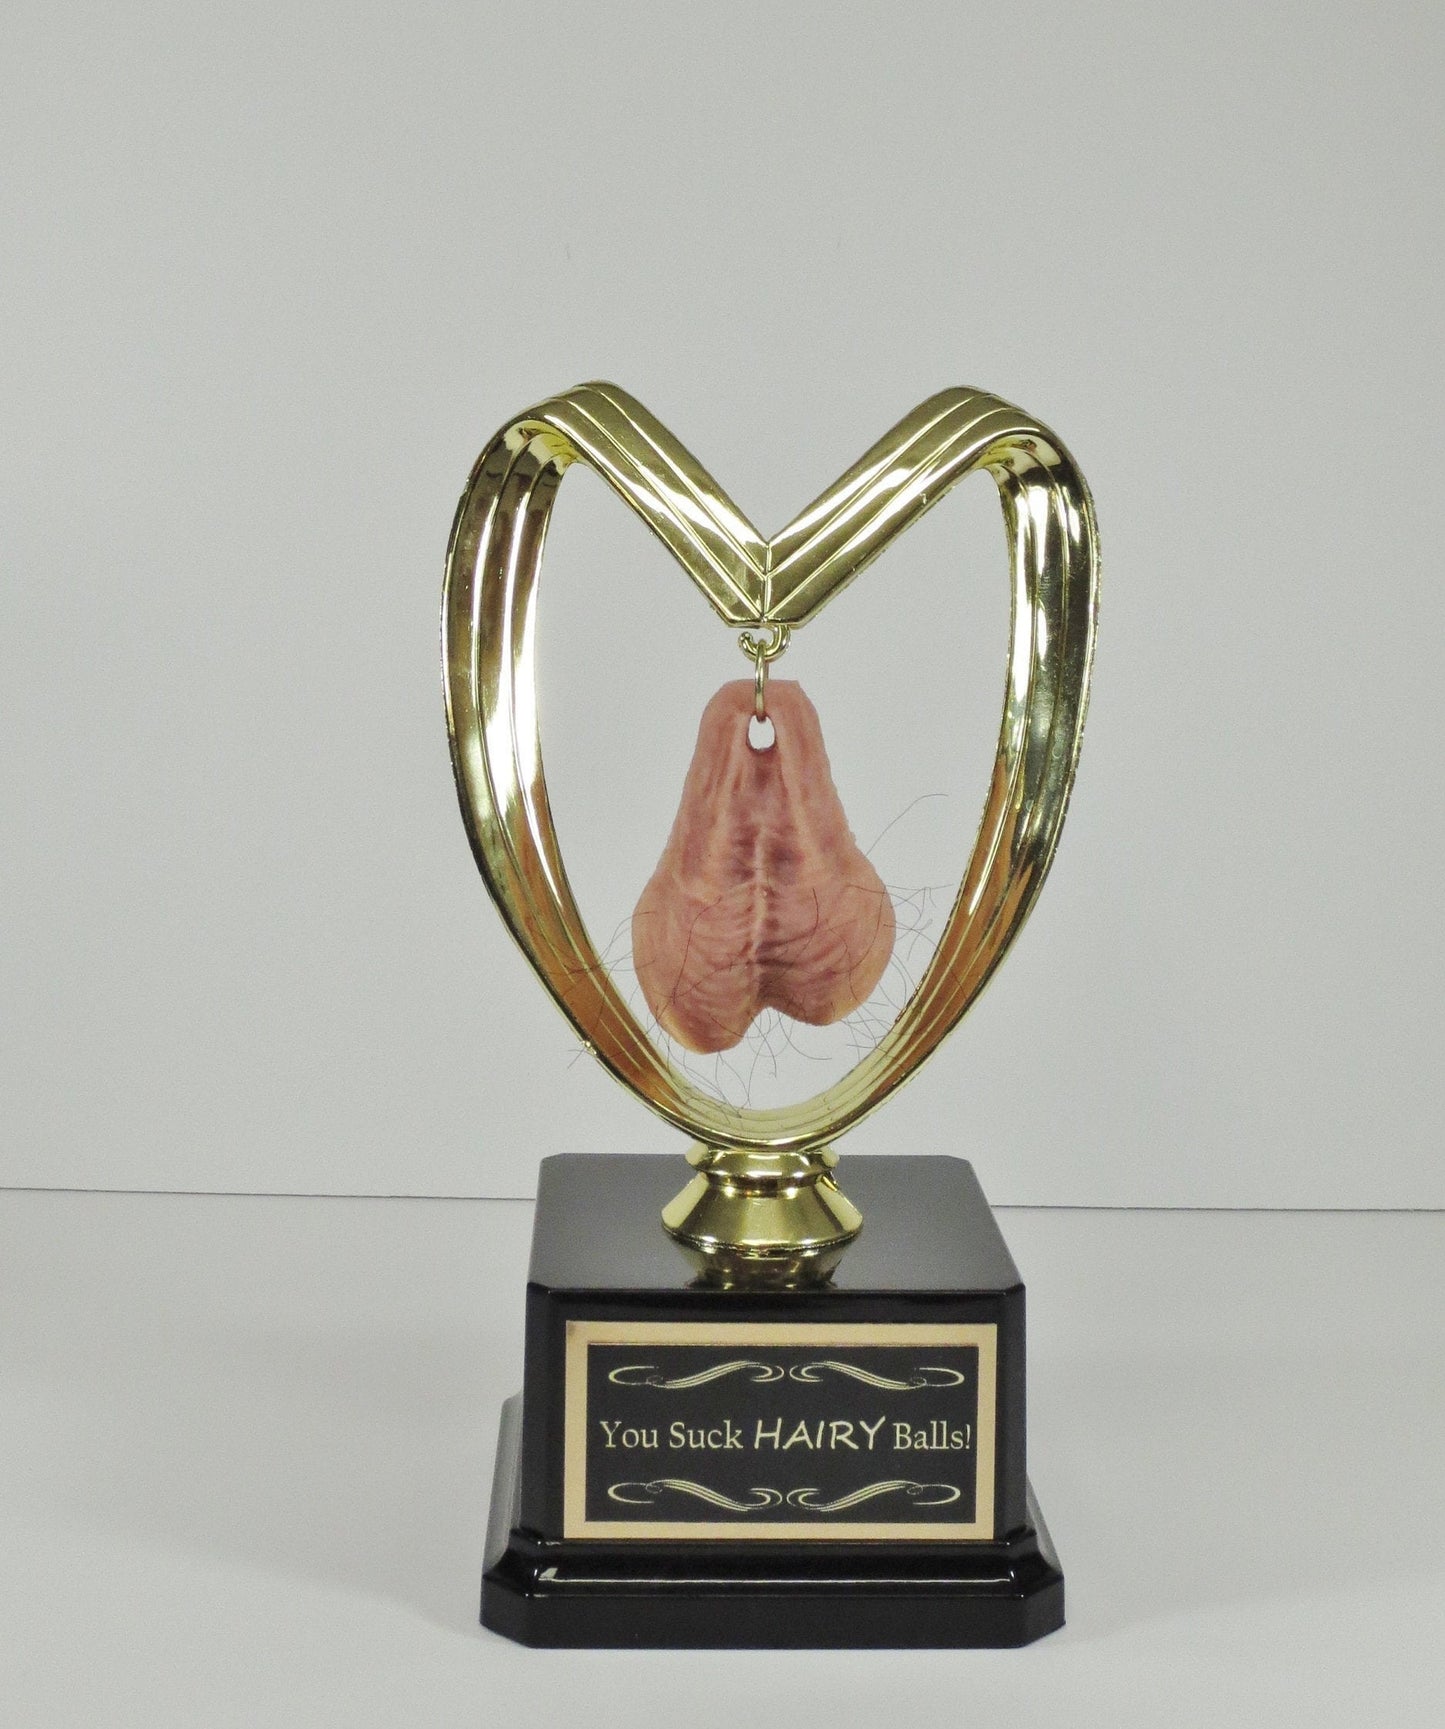 HAIRY Vagina Funny Trophy Loser Trophy Last Place Trophy Hairy Pussy Trophy Adult Humor Gag Gift Inappropriate Birthday Personalized Gift